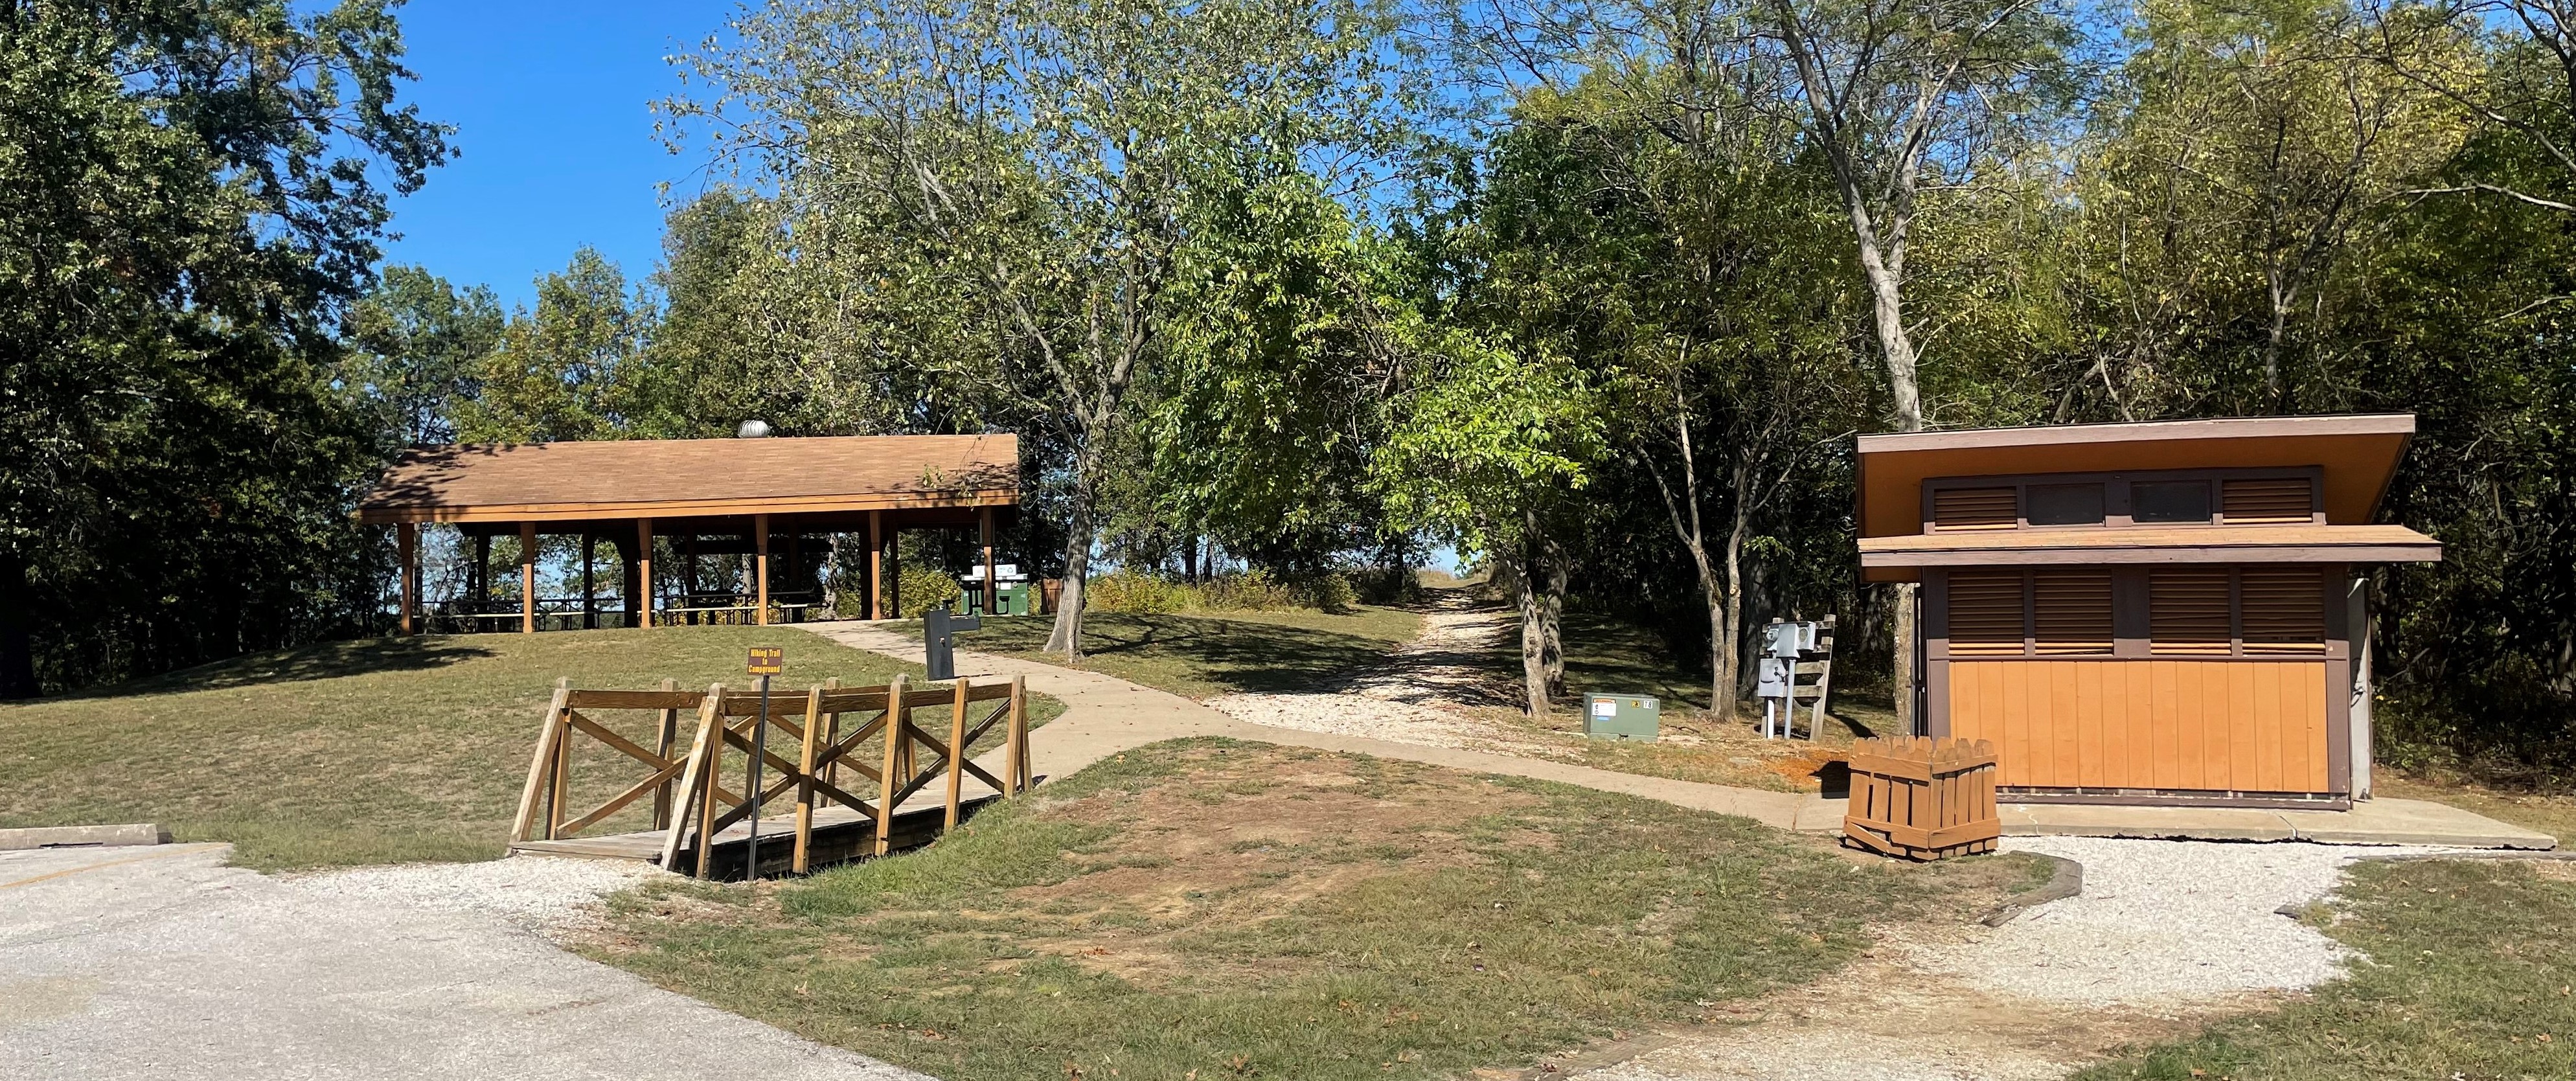 Open picnic shelter with footbridge and restroom in the foreground